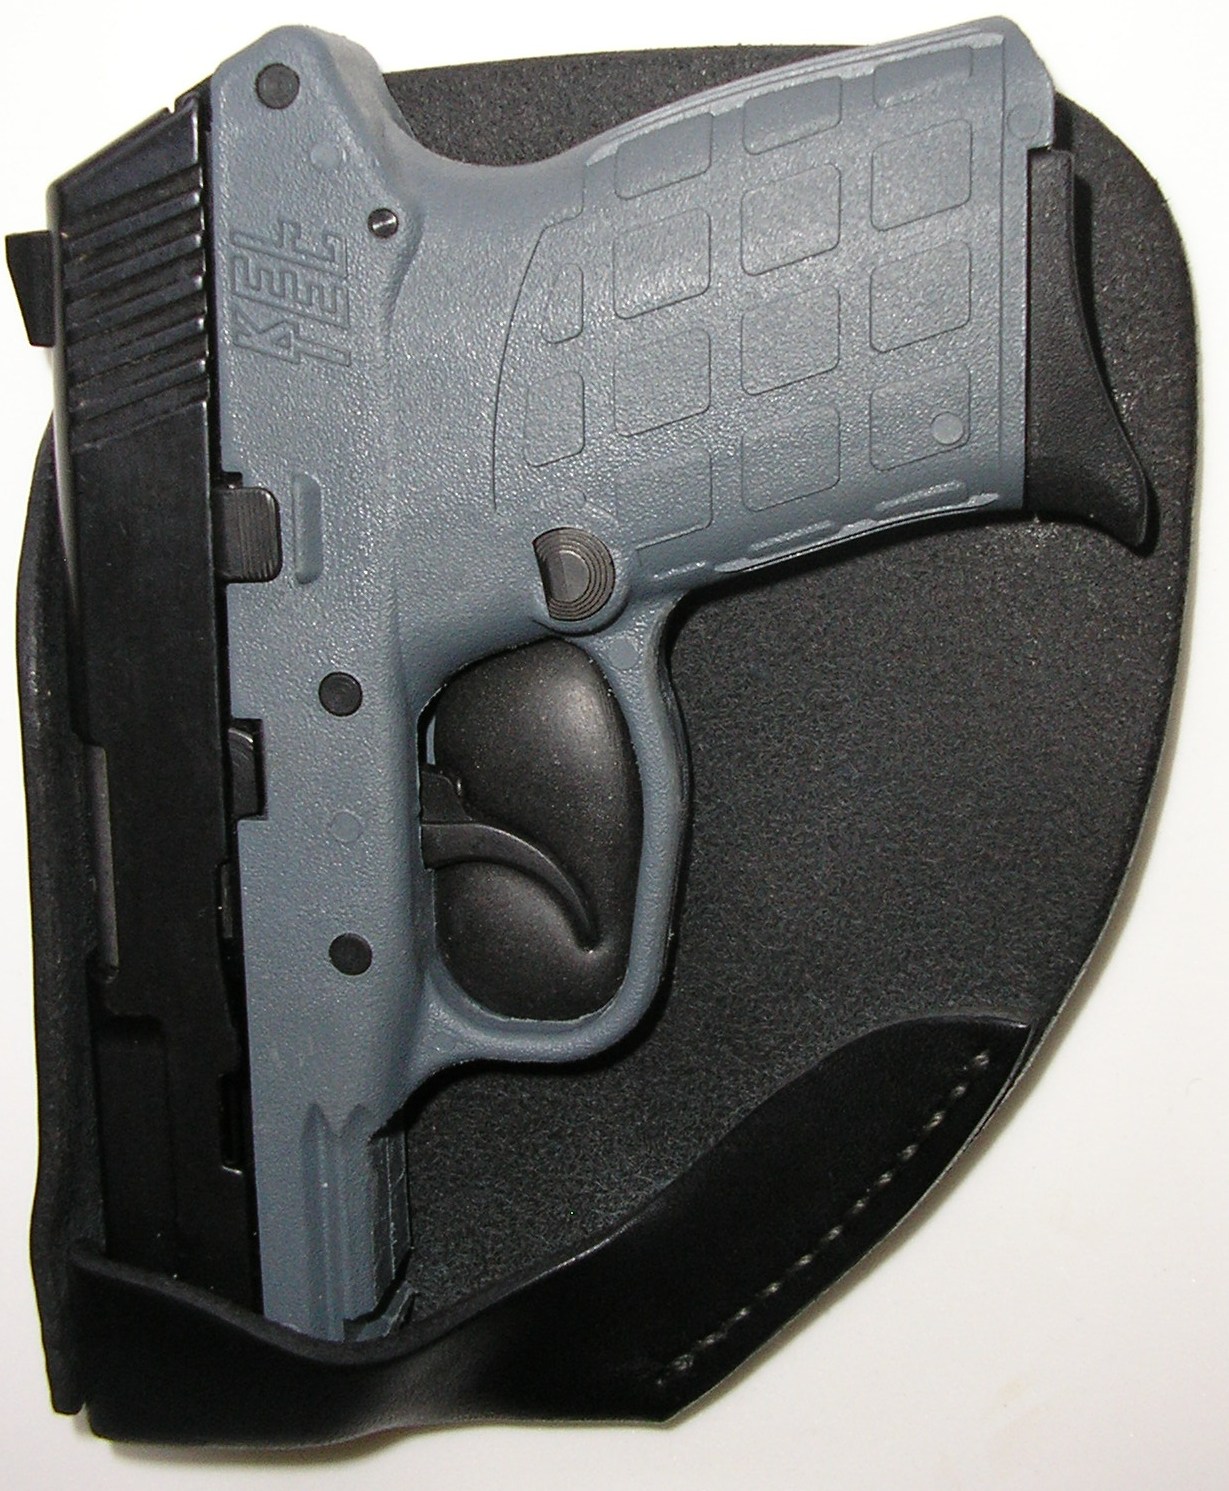 Details about   COMBO PACK IWB OWB RH LH Gun Holster & Mag For Kel Tec PF9 